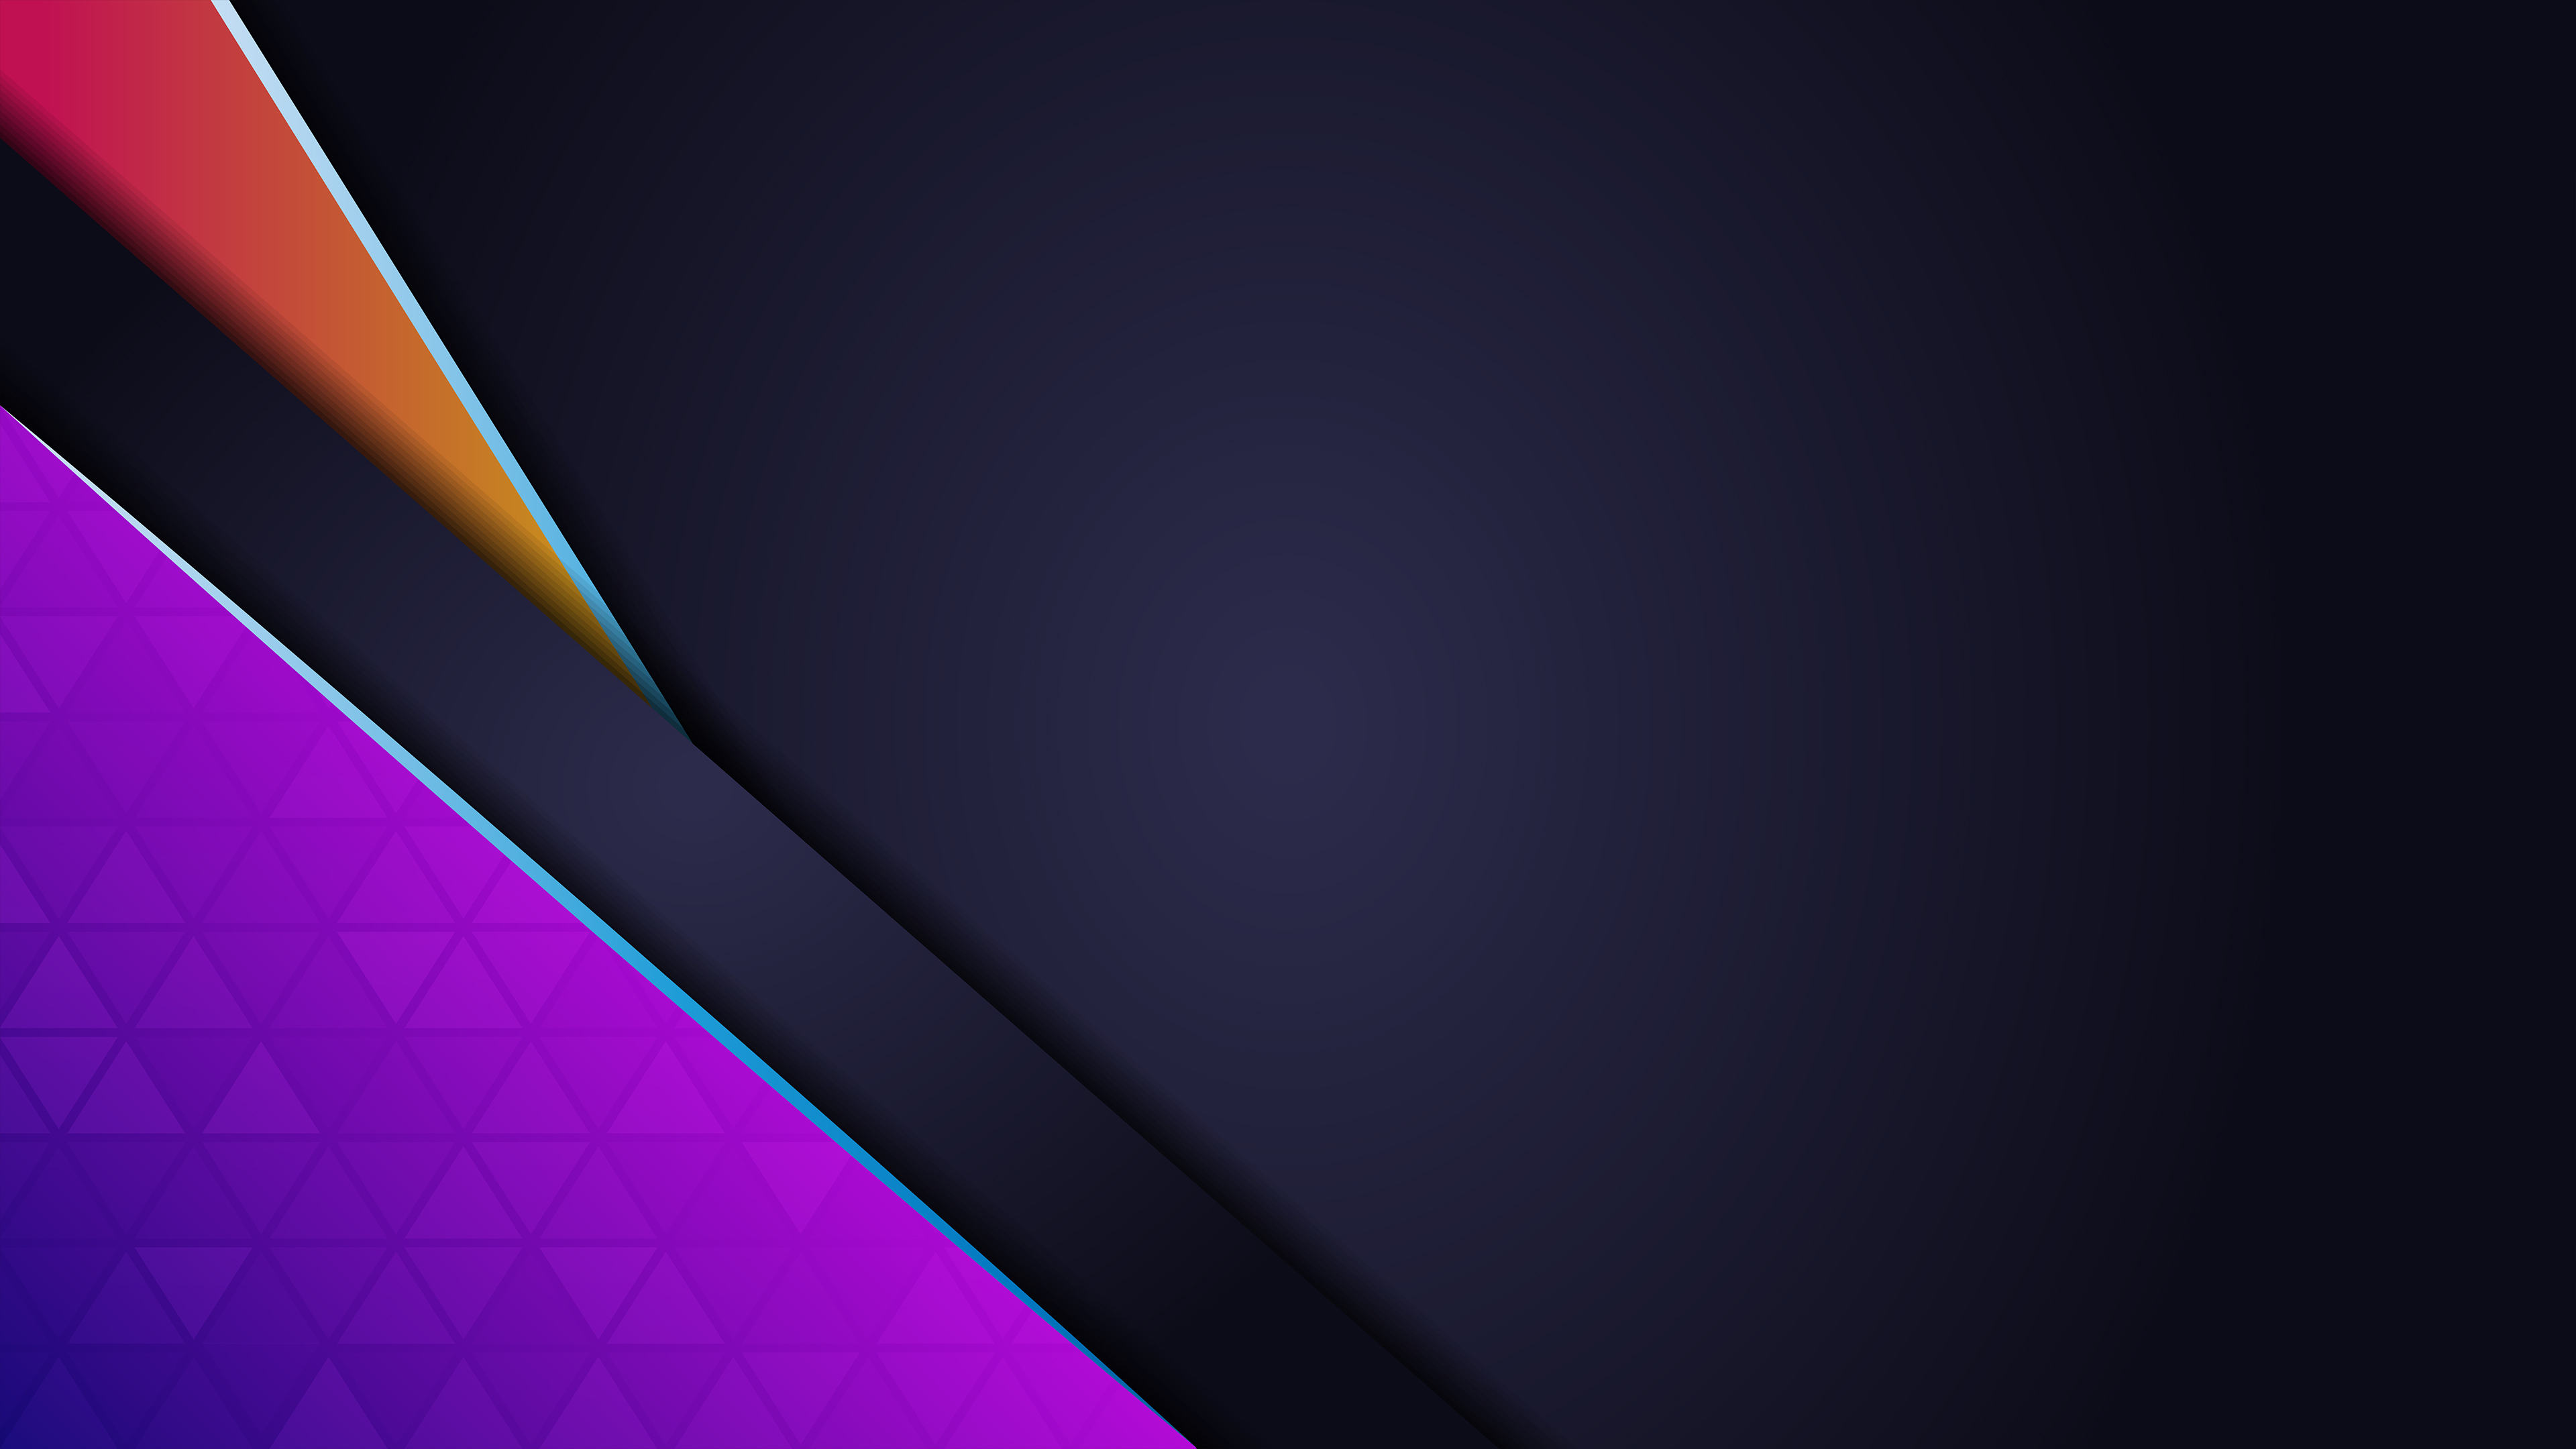 Blue And Purple Rectangles Material Design